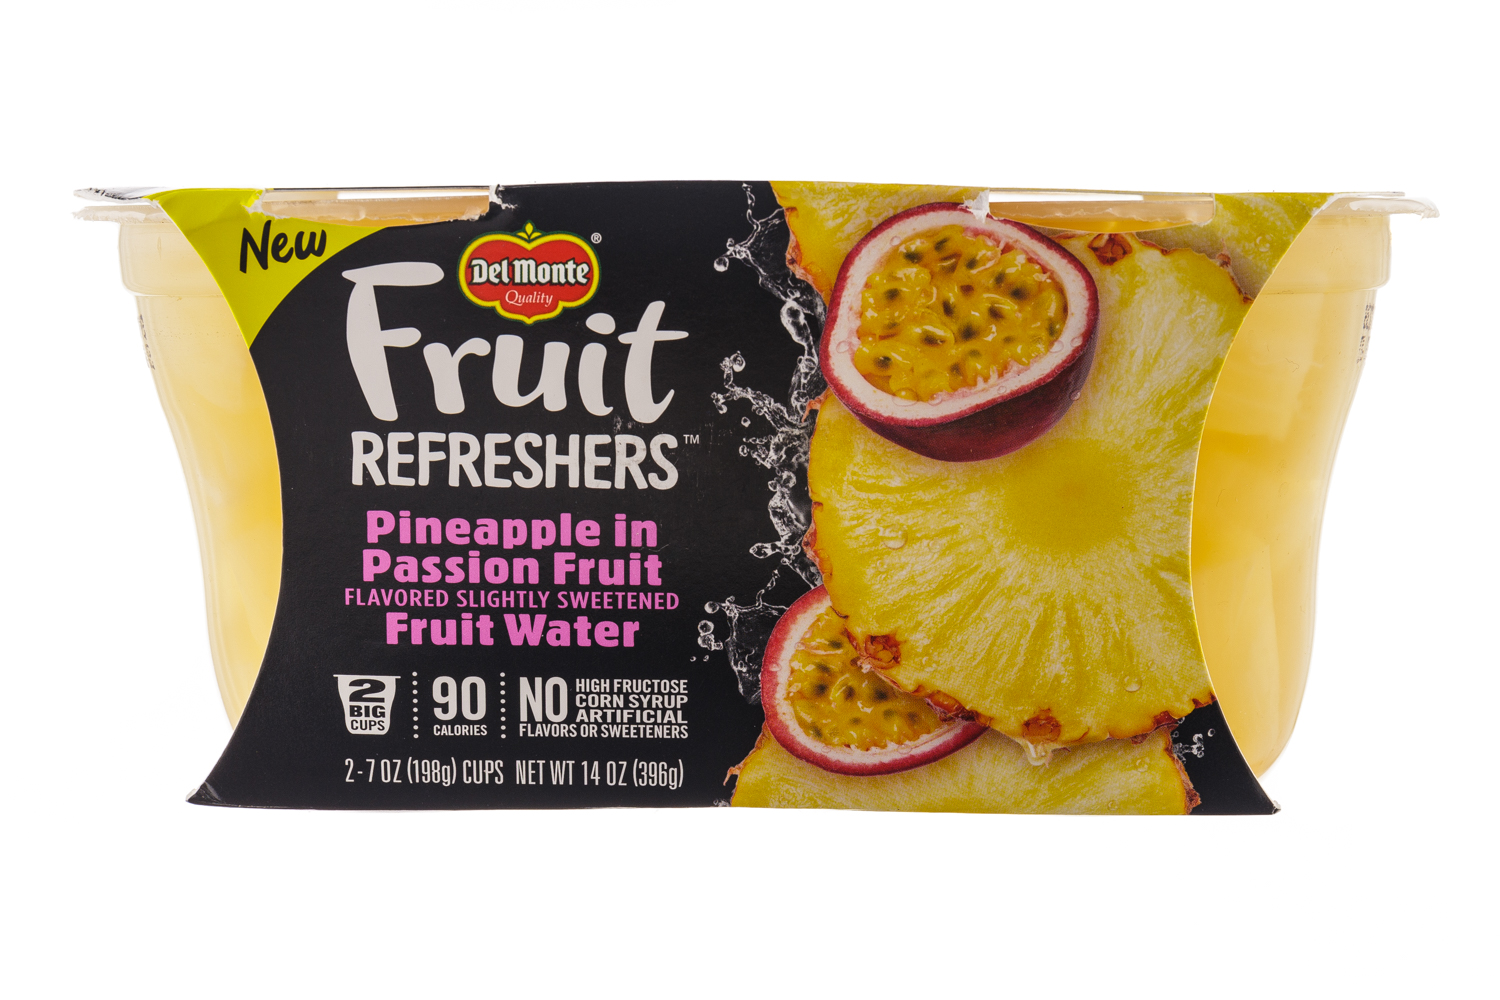 Pineapple in Passionfruit Fruit Water